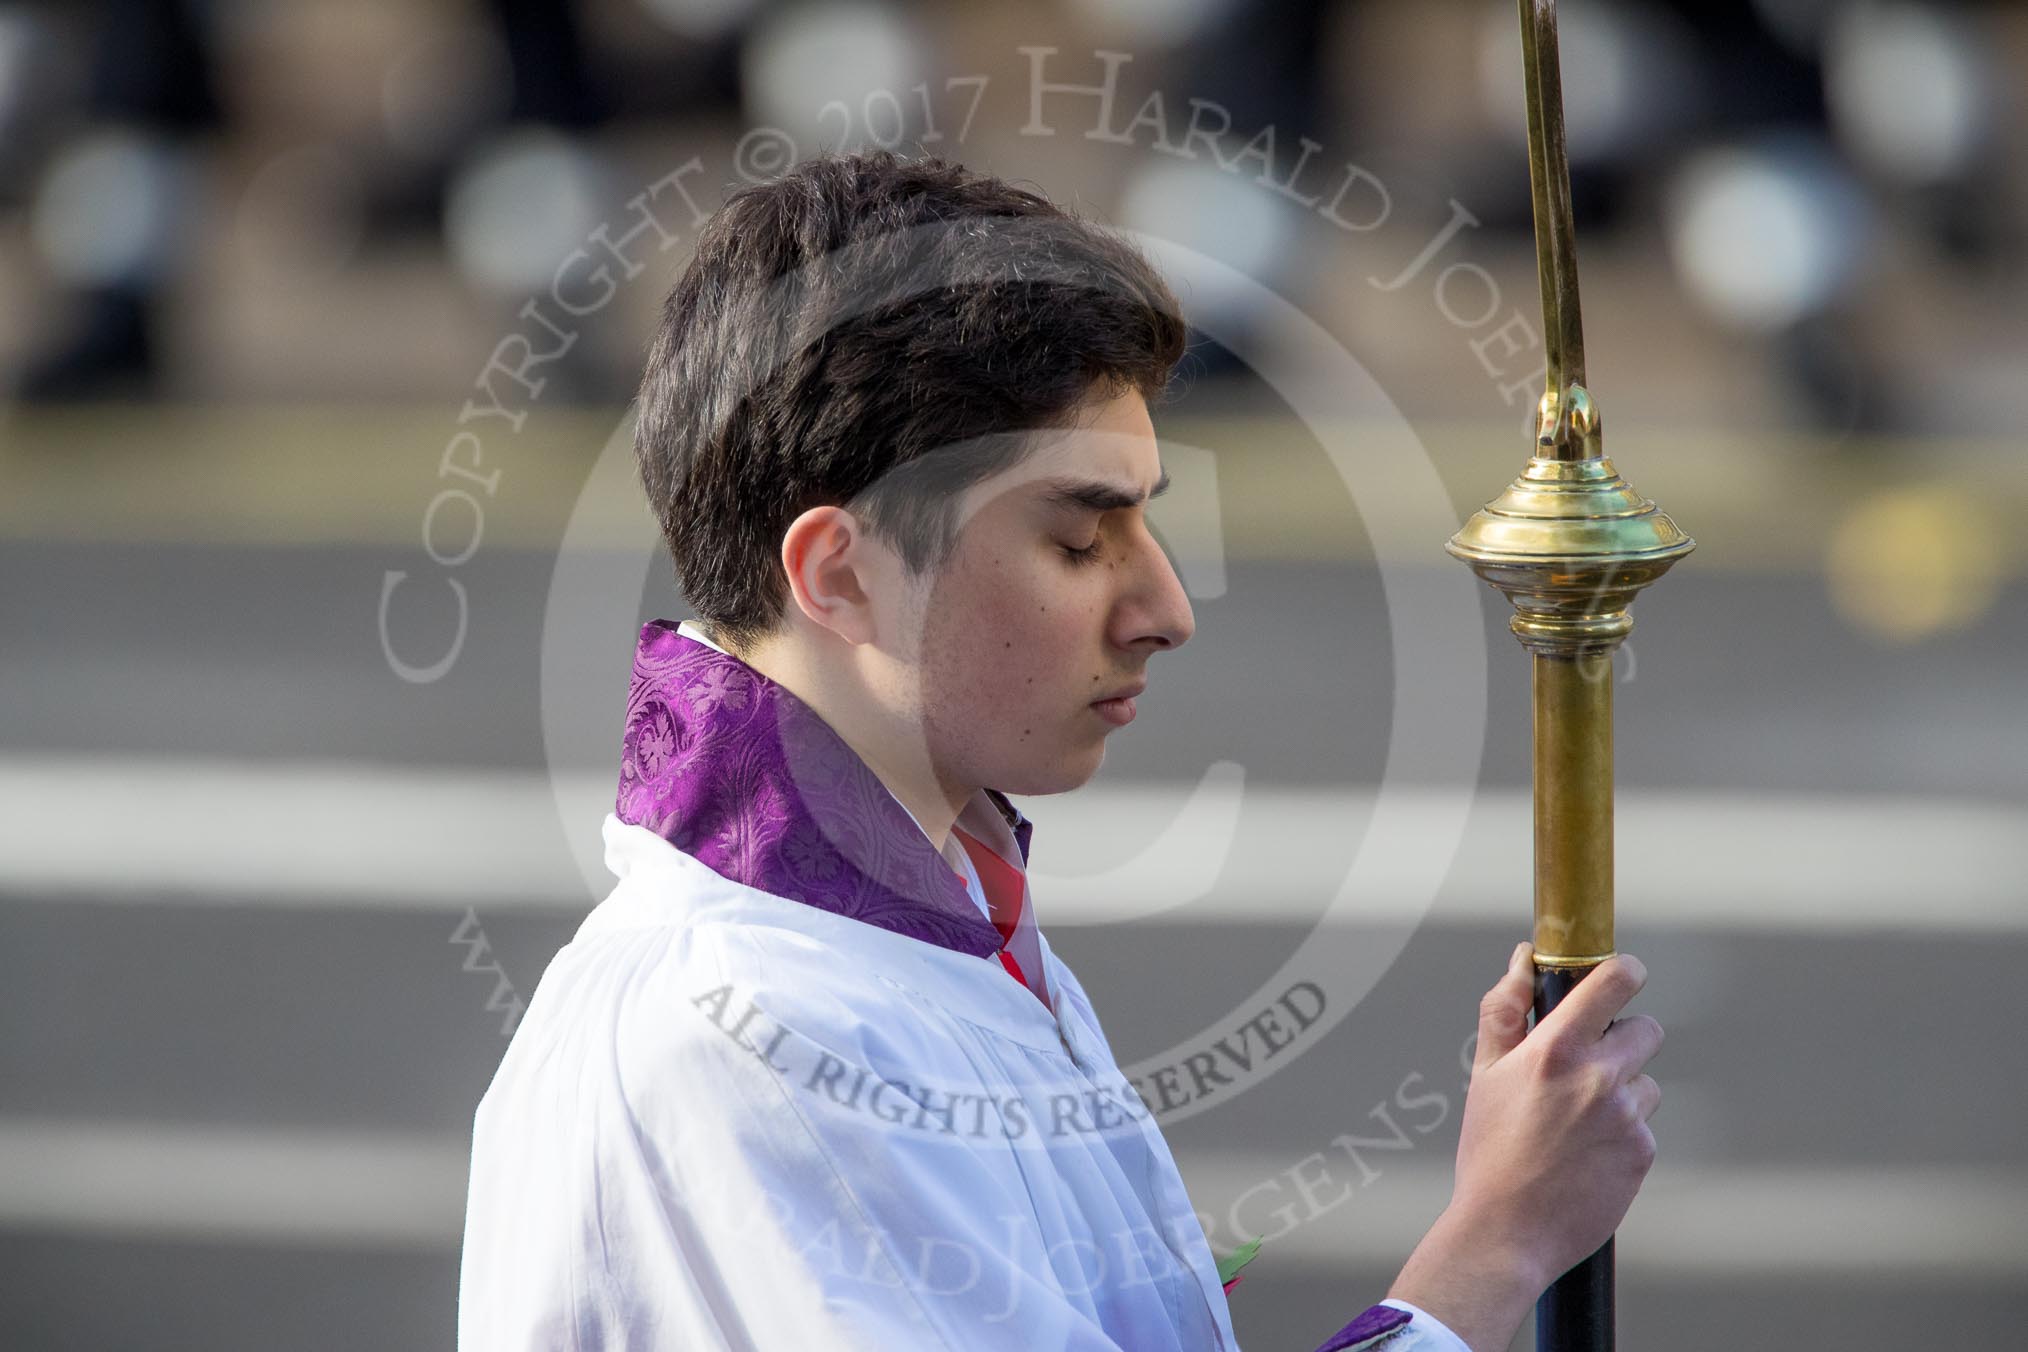 The Cross­Bearer, Michael Clayton Jolly, during the Remembrance Sunday Cenotaph Ceremony 2018 at Horse Guards Parade, Westminster, London, 11 November 2018, 10:54.